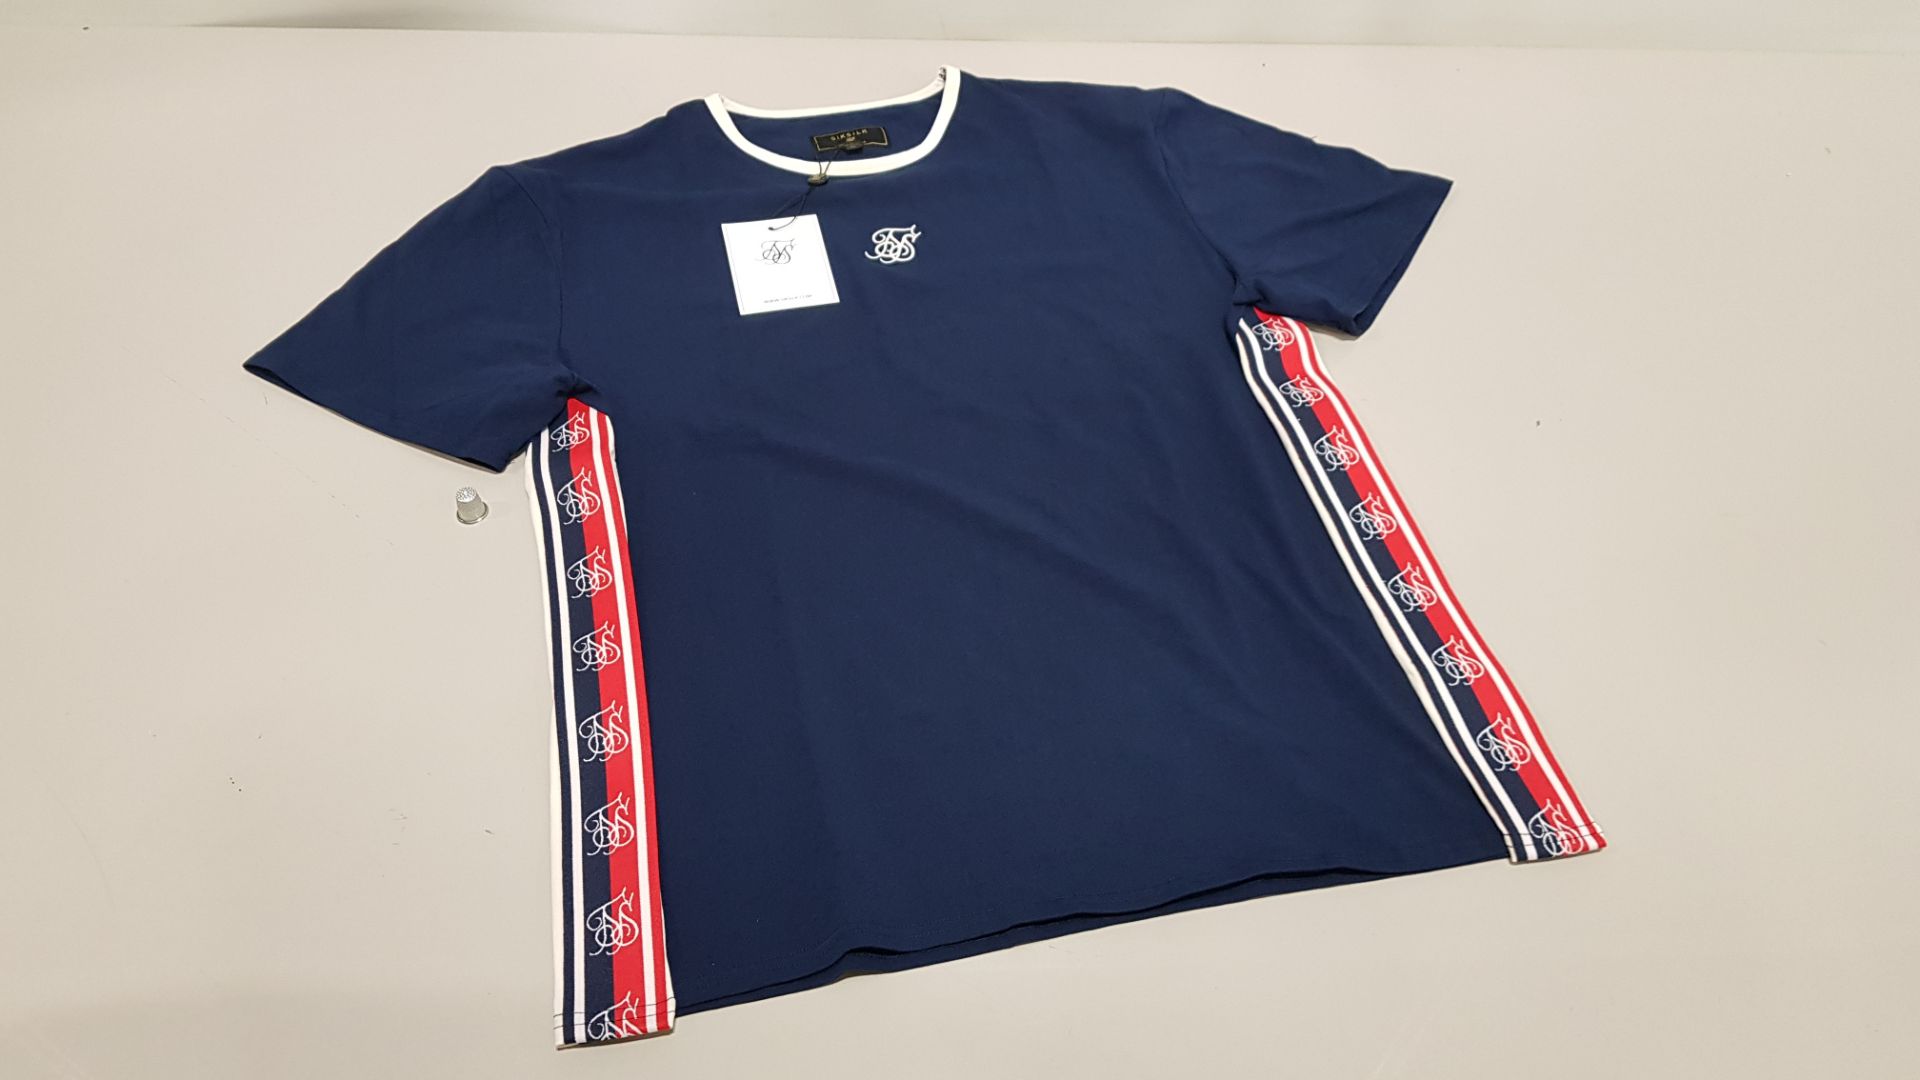 10 X BRAND NEW NAVY S/S ESSENTIAL RETRO TAPE TEE IN VARIOUS SIZES